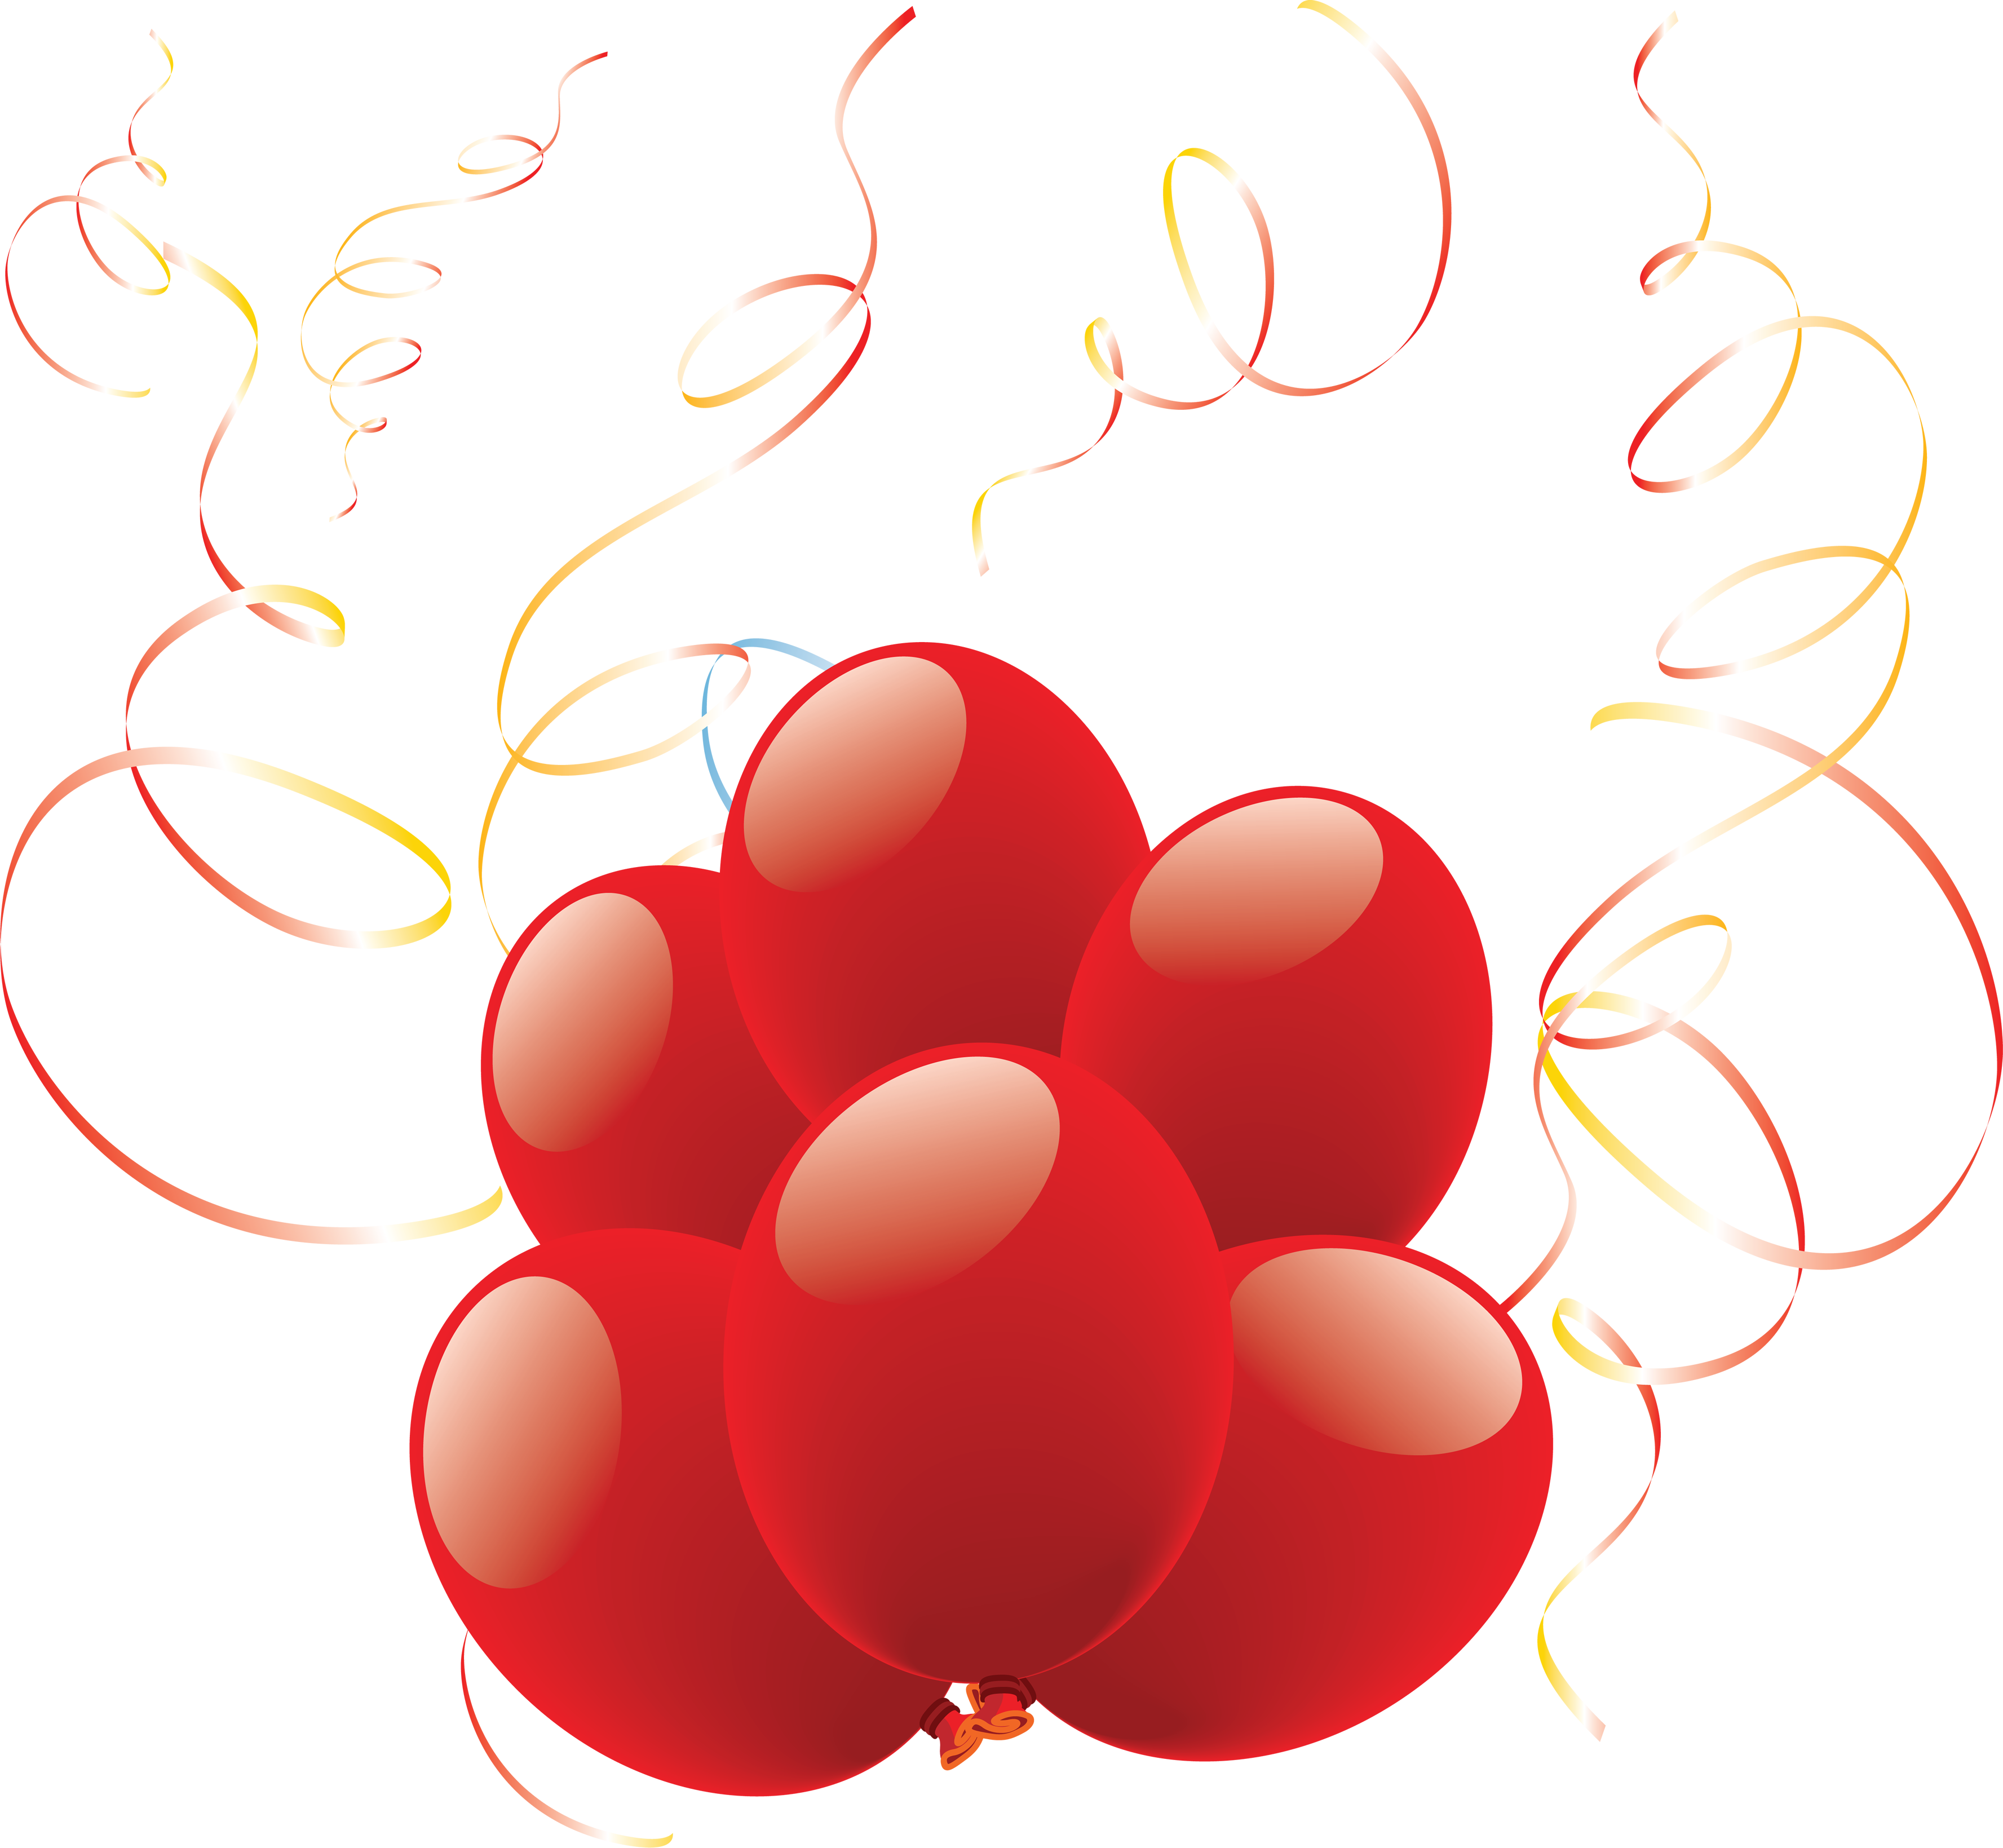 Heart Shaped Balloons With Ribbon Png Image Purepng Free Transparent Cc0 Png Image Library